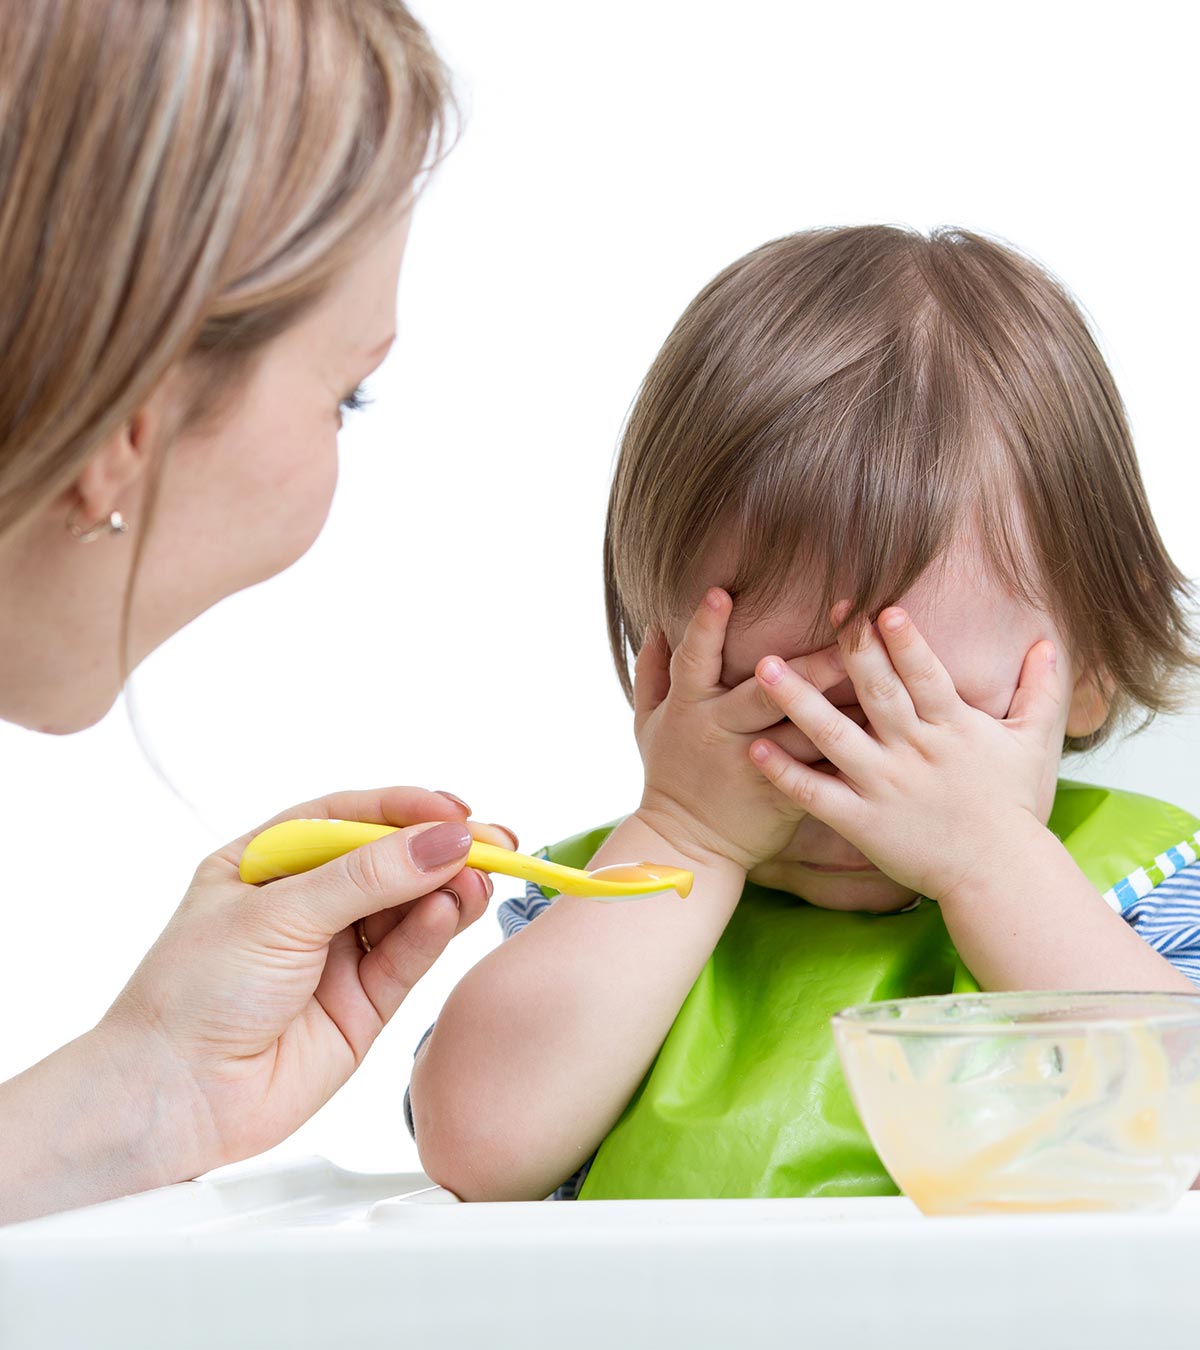 Toddler Suffering From Loss Of Appetite